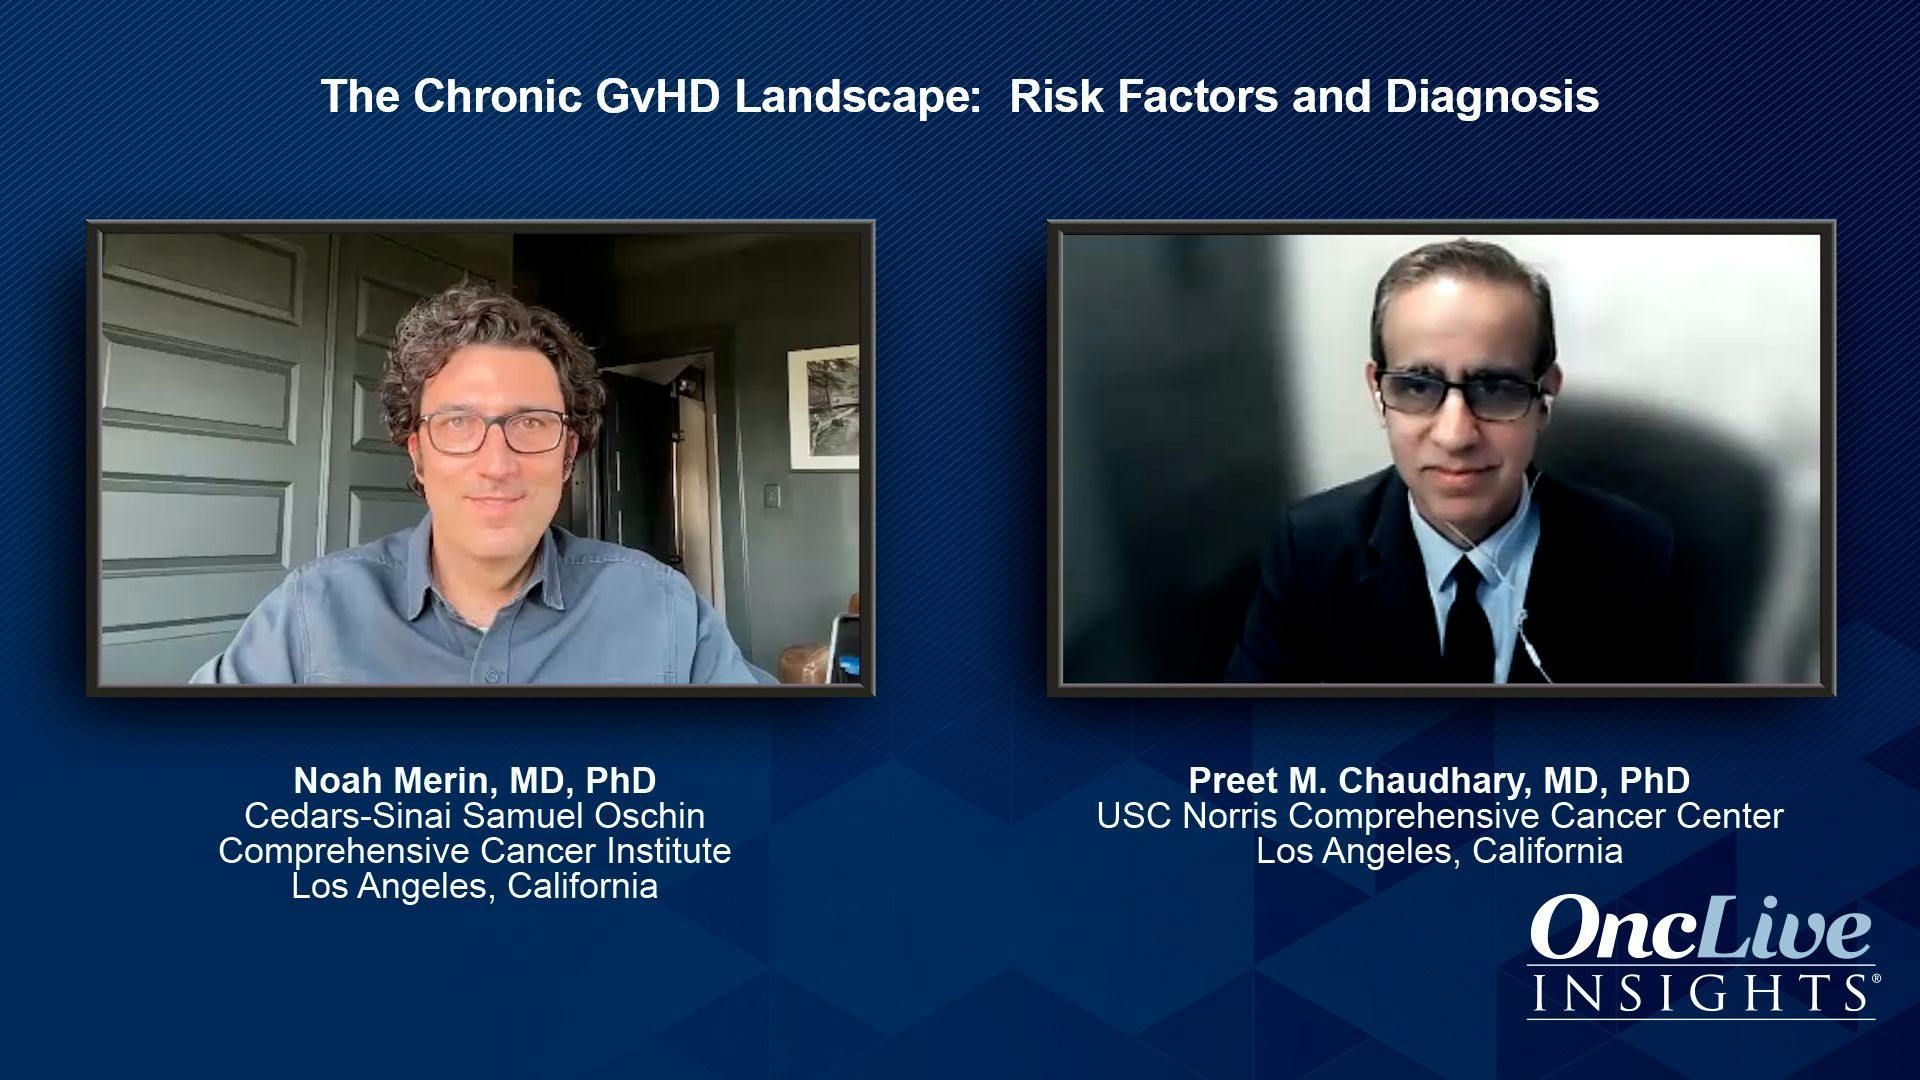 Post-Conference Perspectives: Recent Advances in the Management of Chronic GvHD